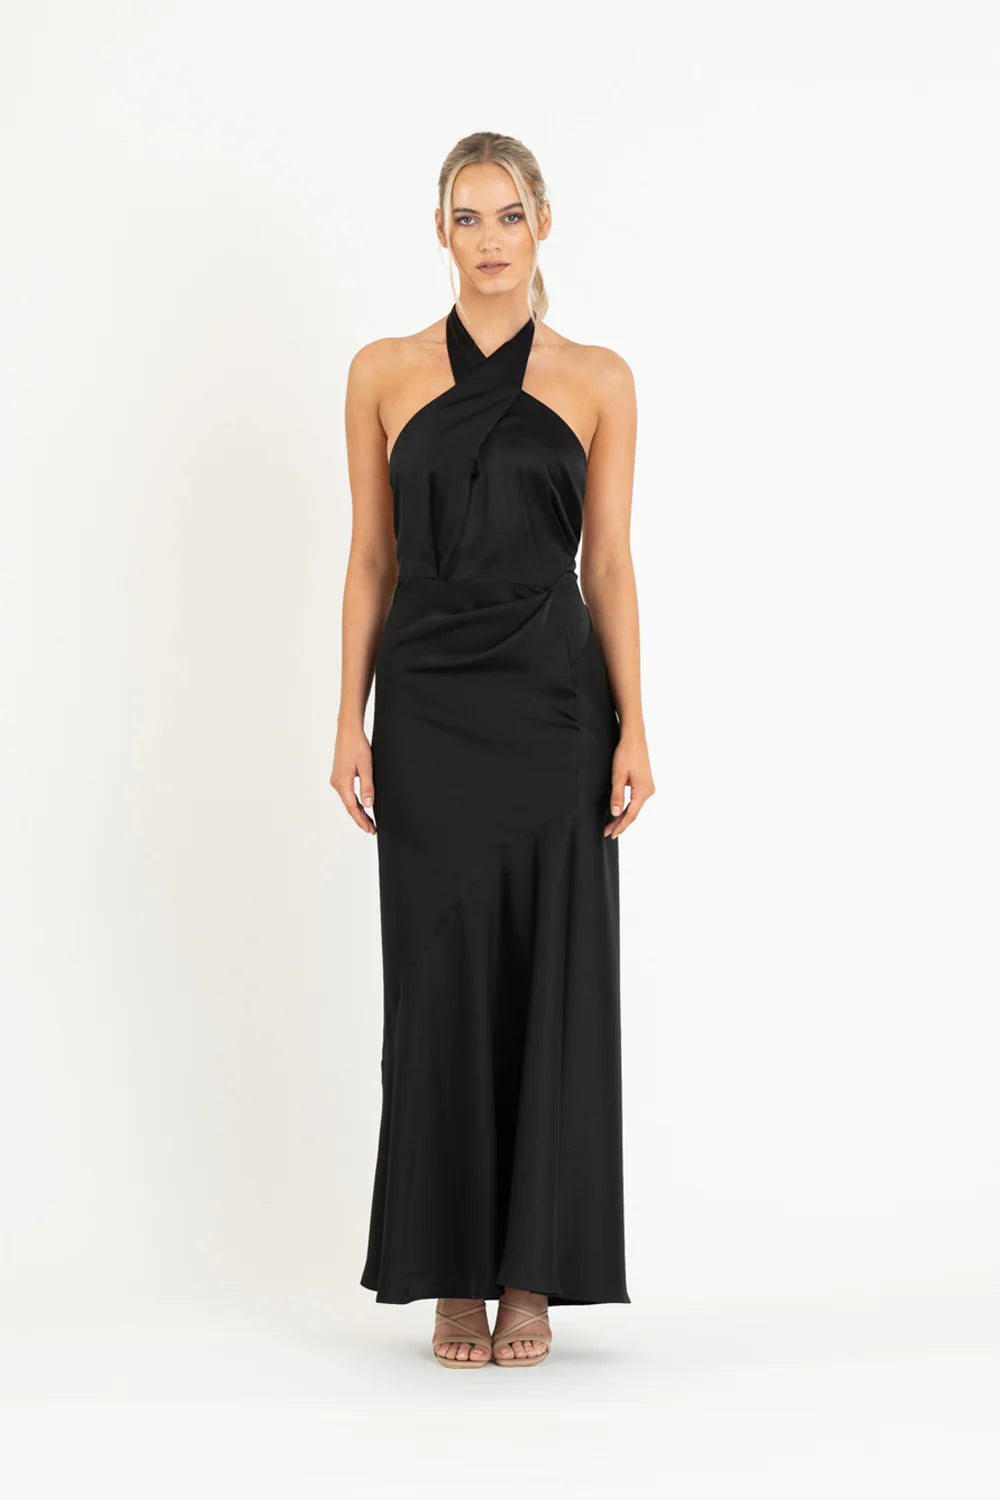 One Fell Swoop Zion Maxi, New Black